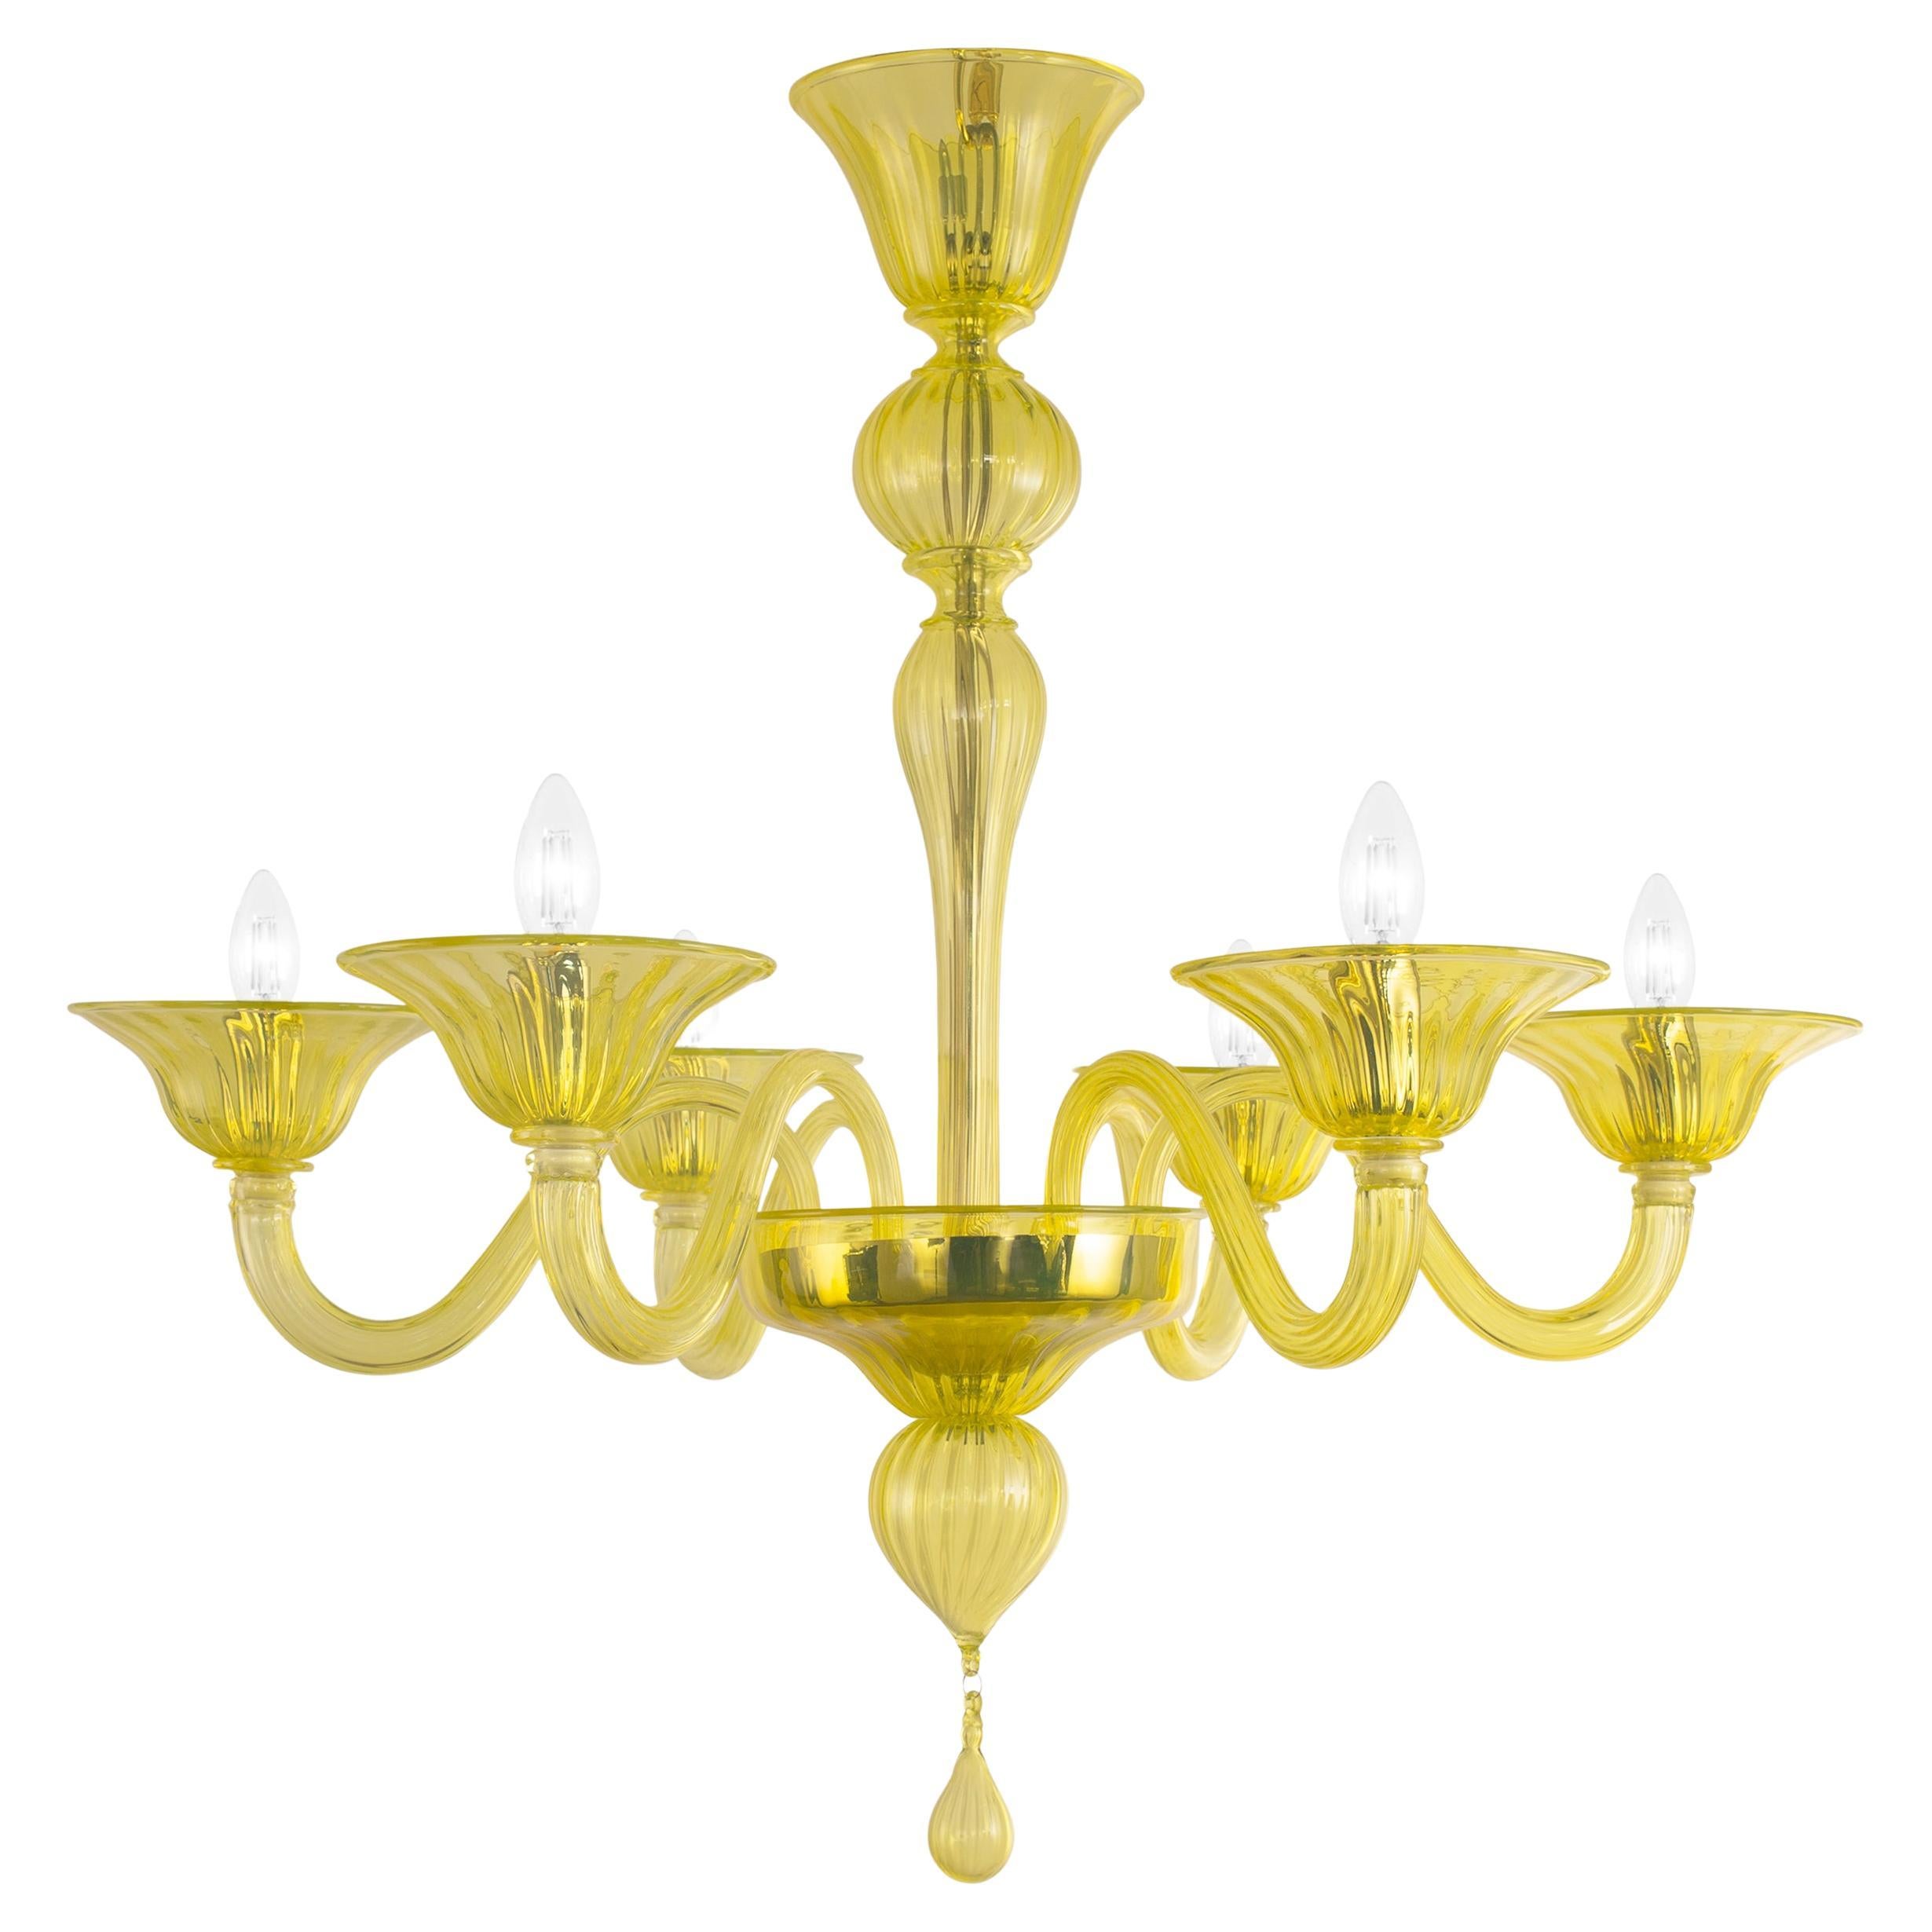 Simplicissimus Chandelier, 6 lights, Yellow Murano Glass by Multiforme For Sale